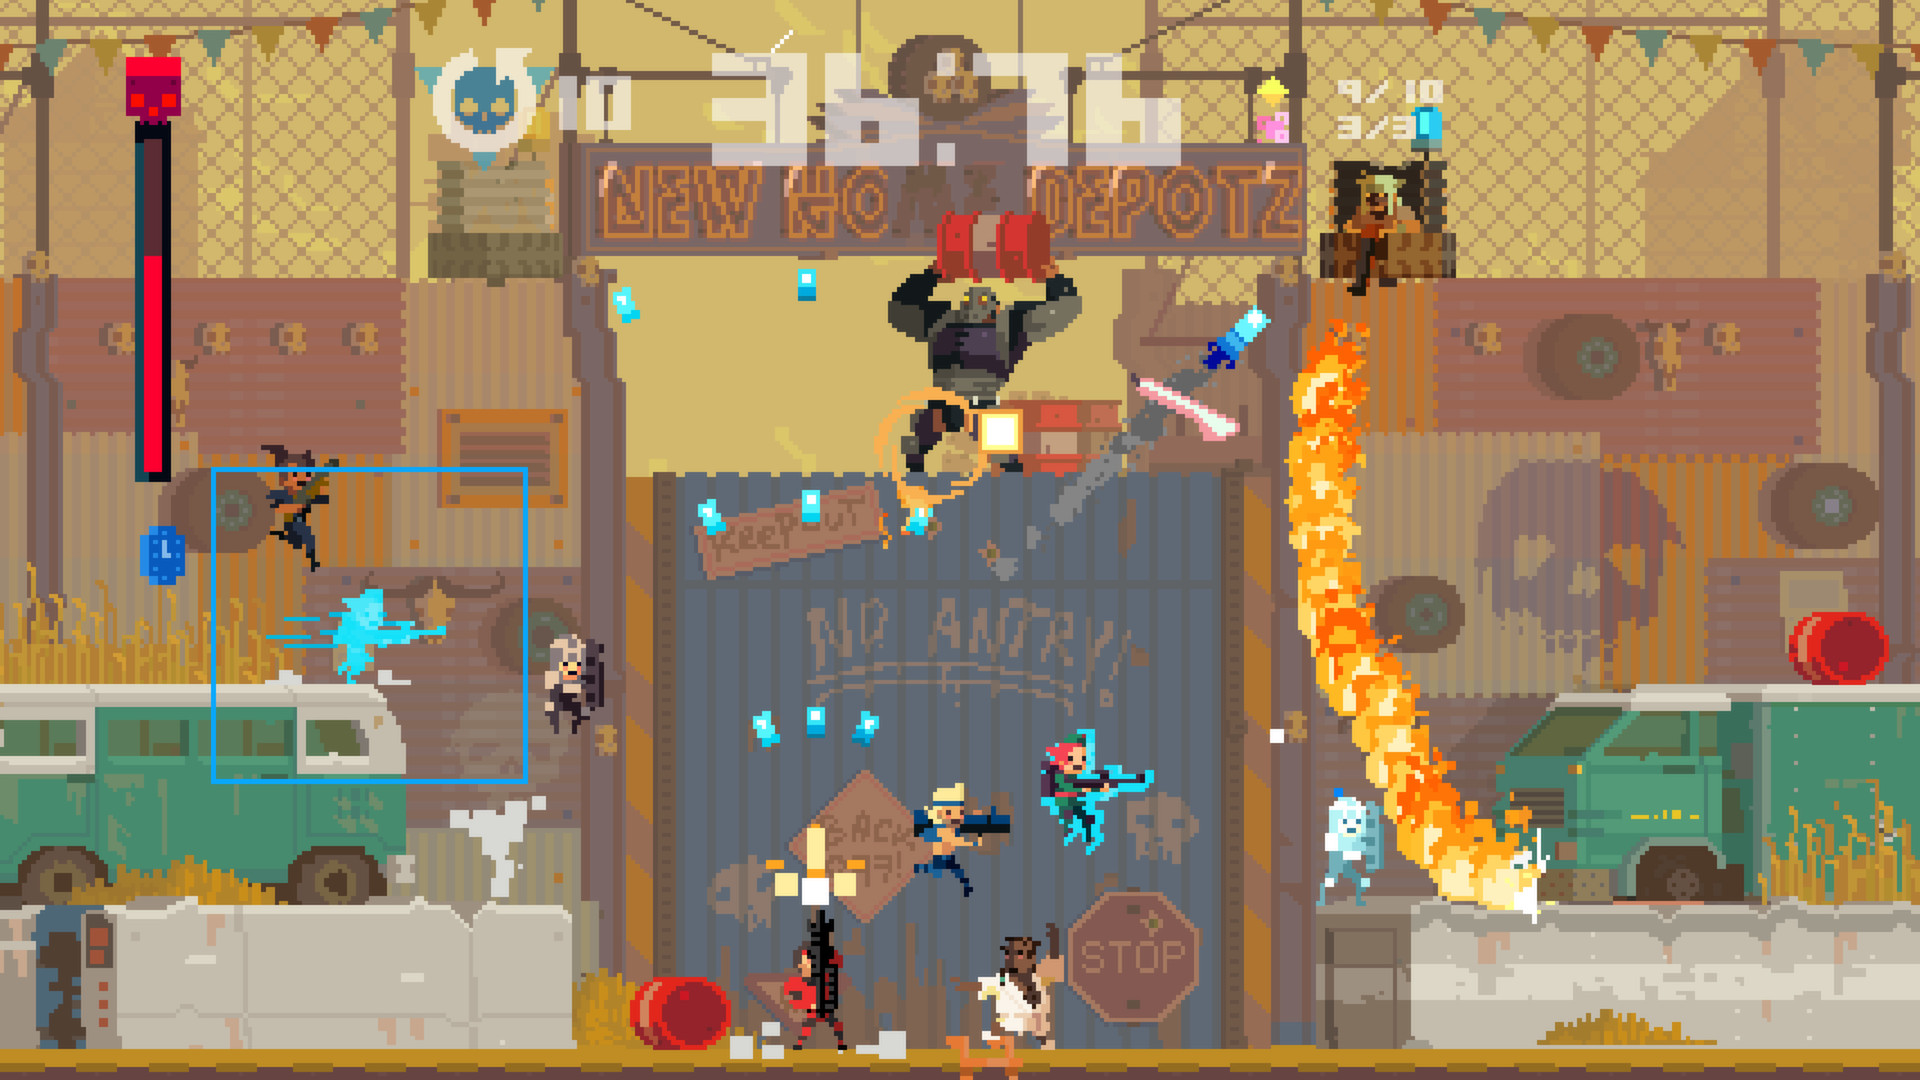 Super Time Force Features